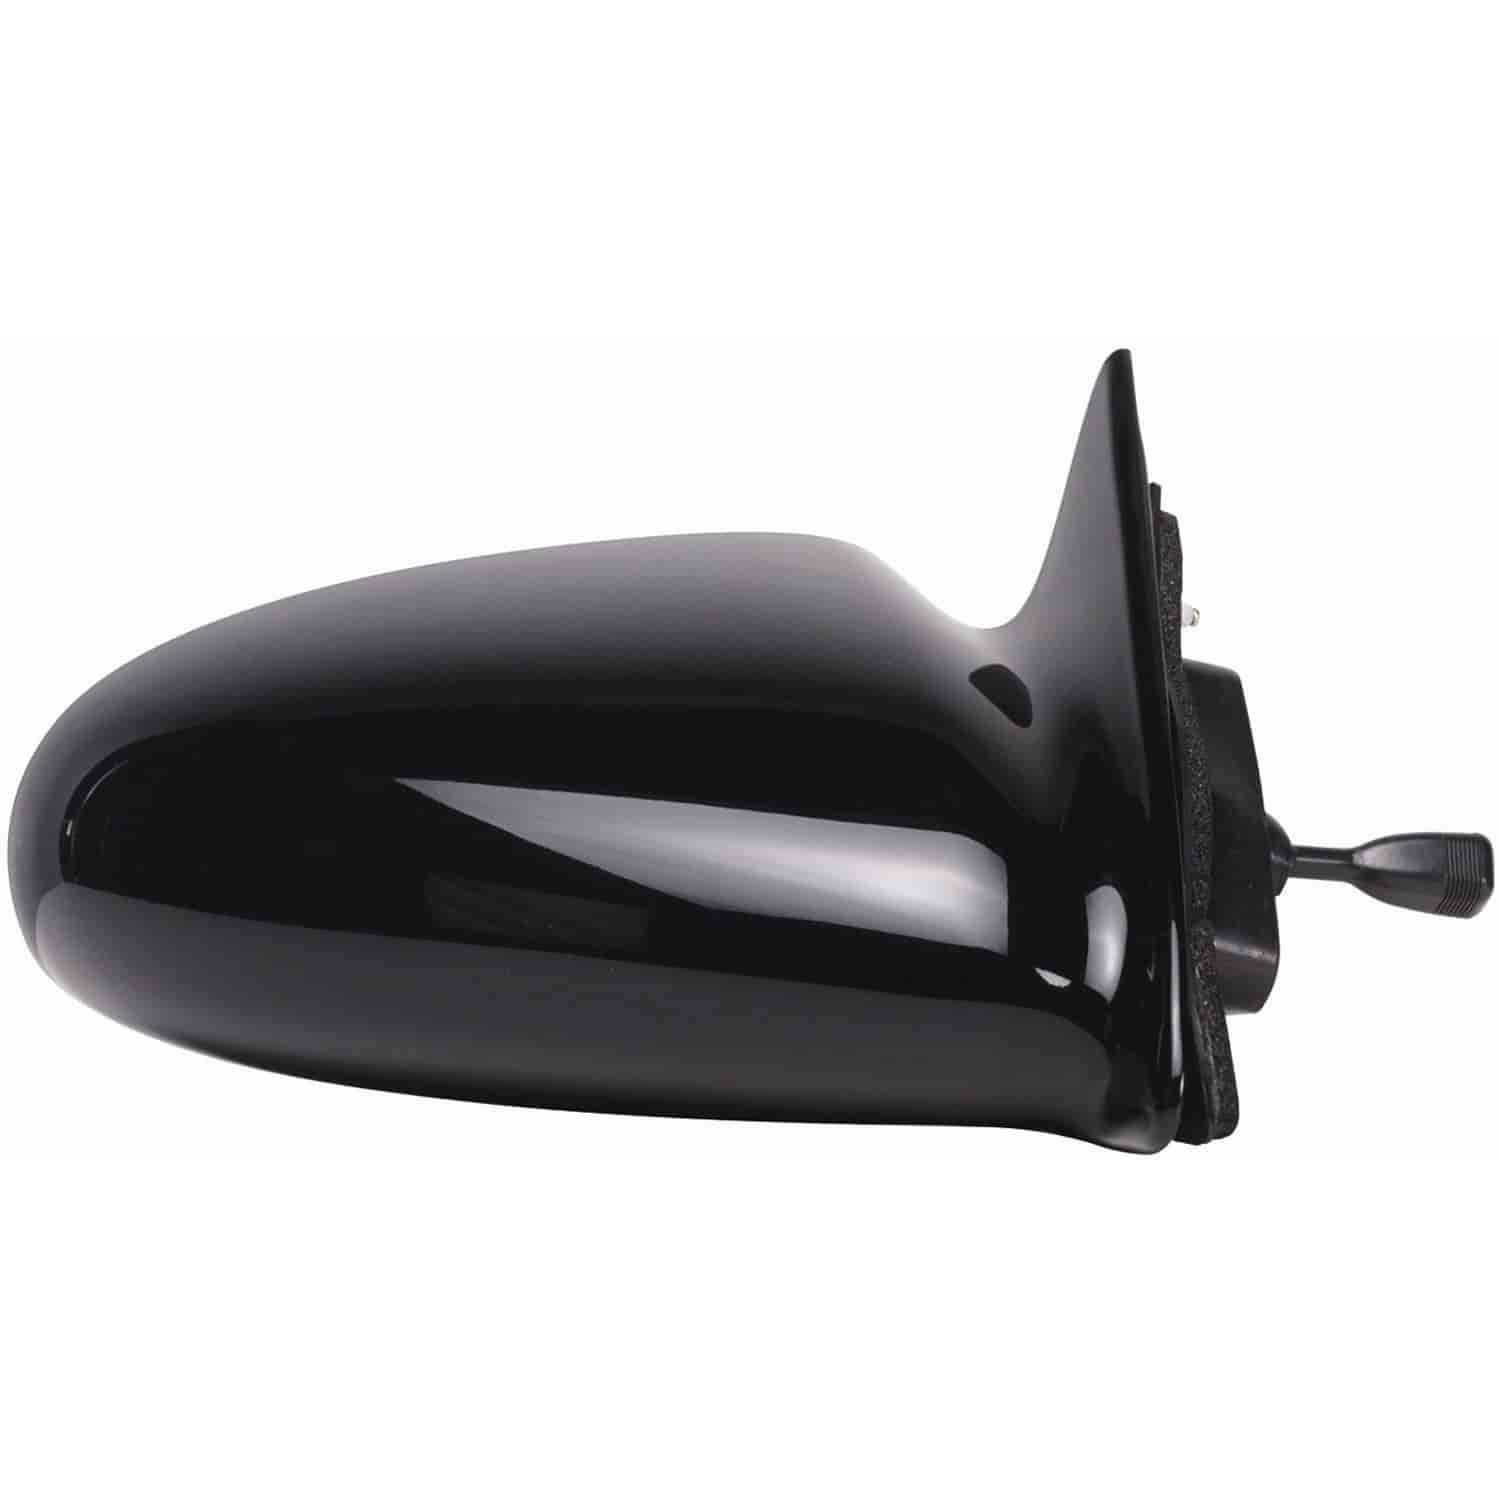 OEM Style Replacement mirror for 93-97 GEO Prizm passenger side mirror tested to fit and function li